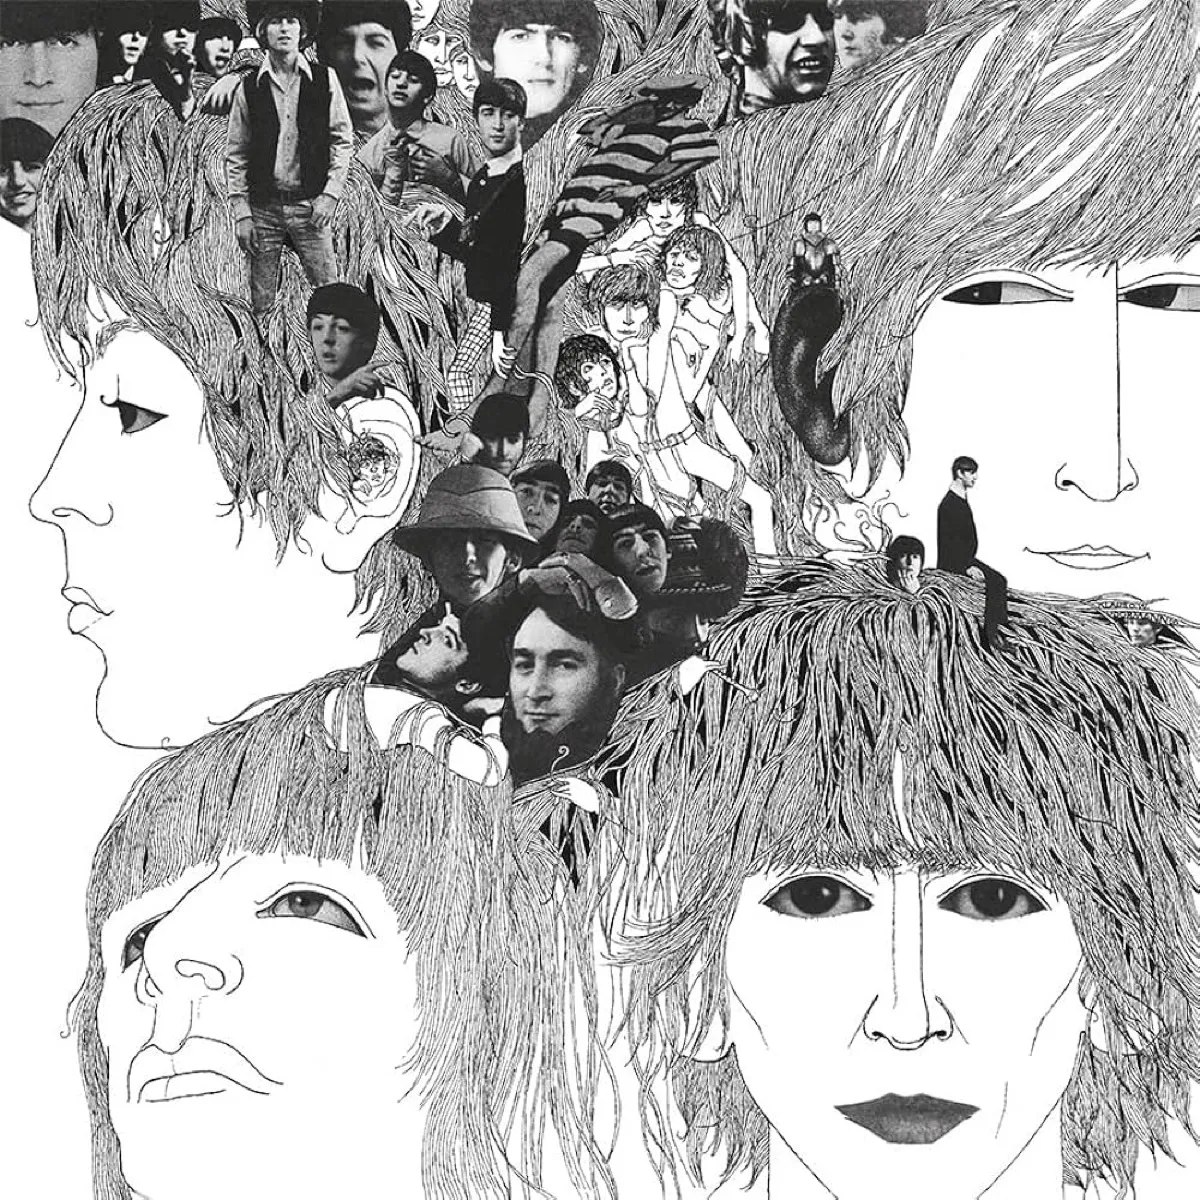 "Revolver: Special Edition" by The Beatles album cover